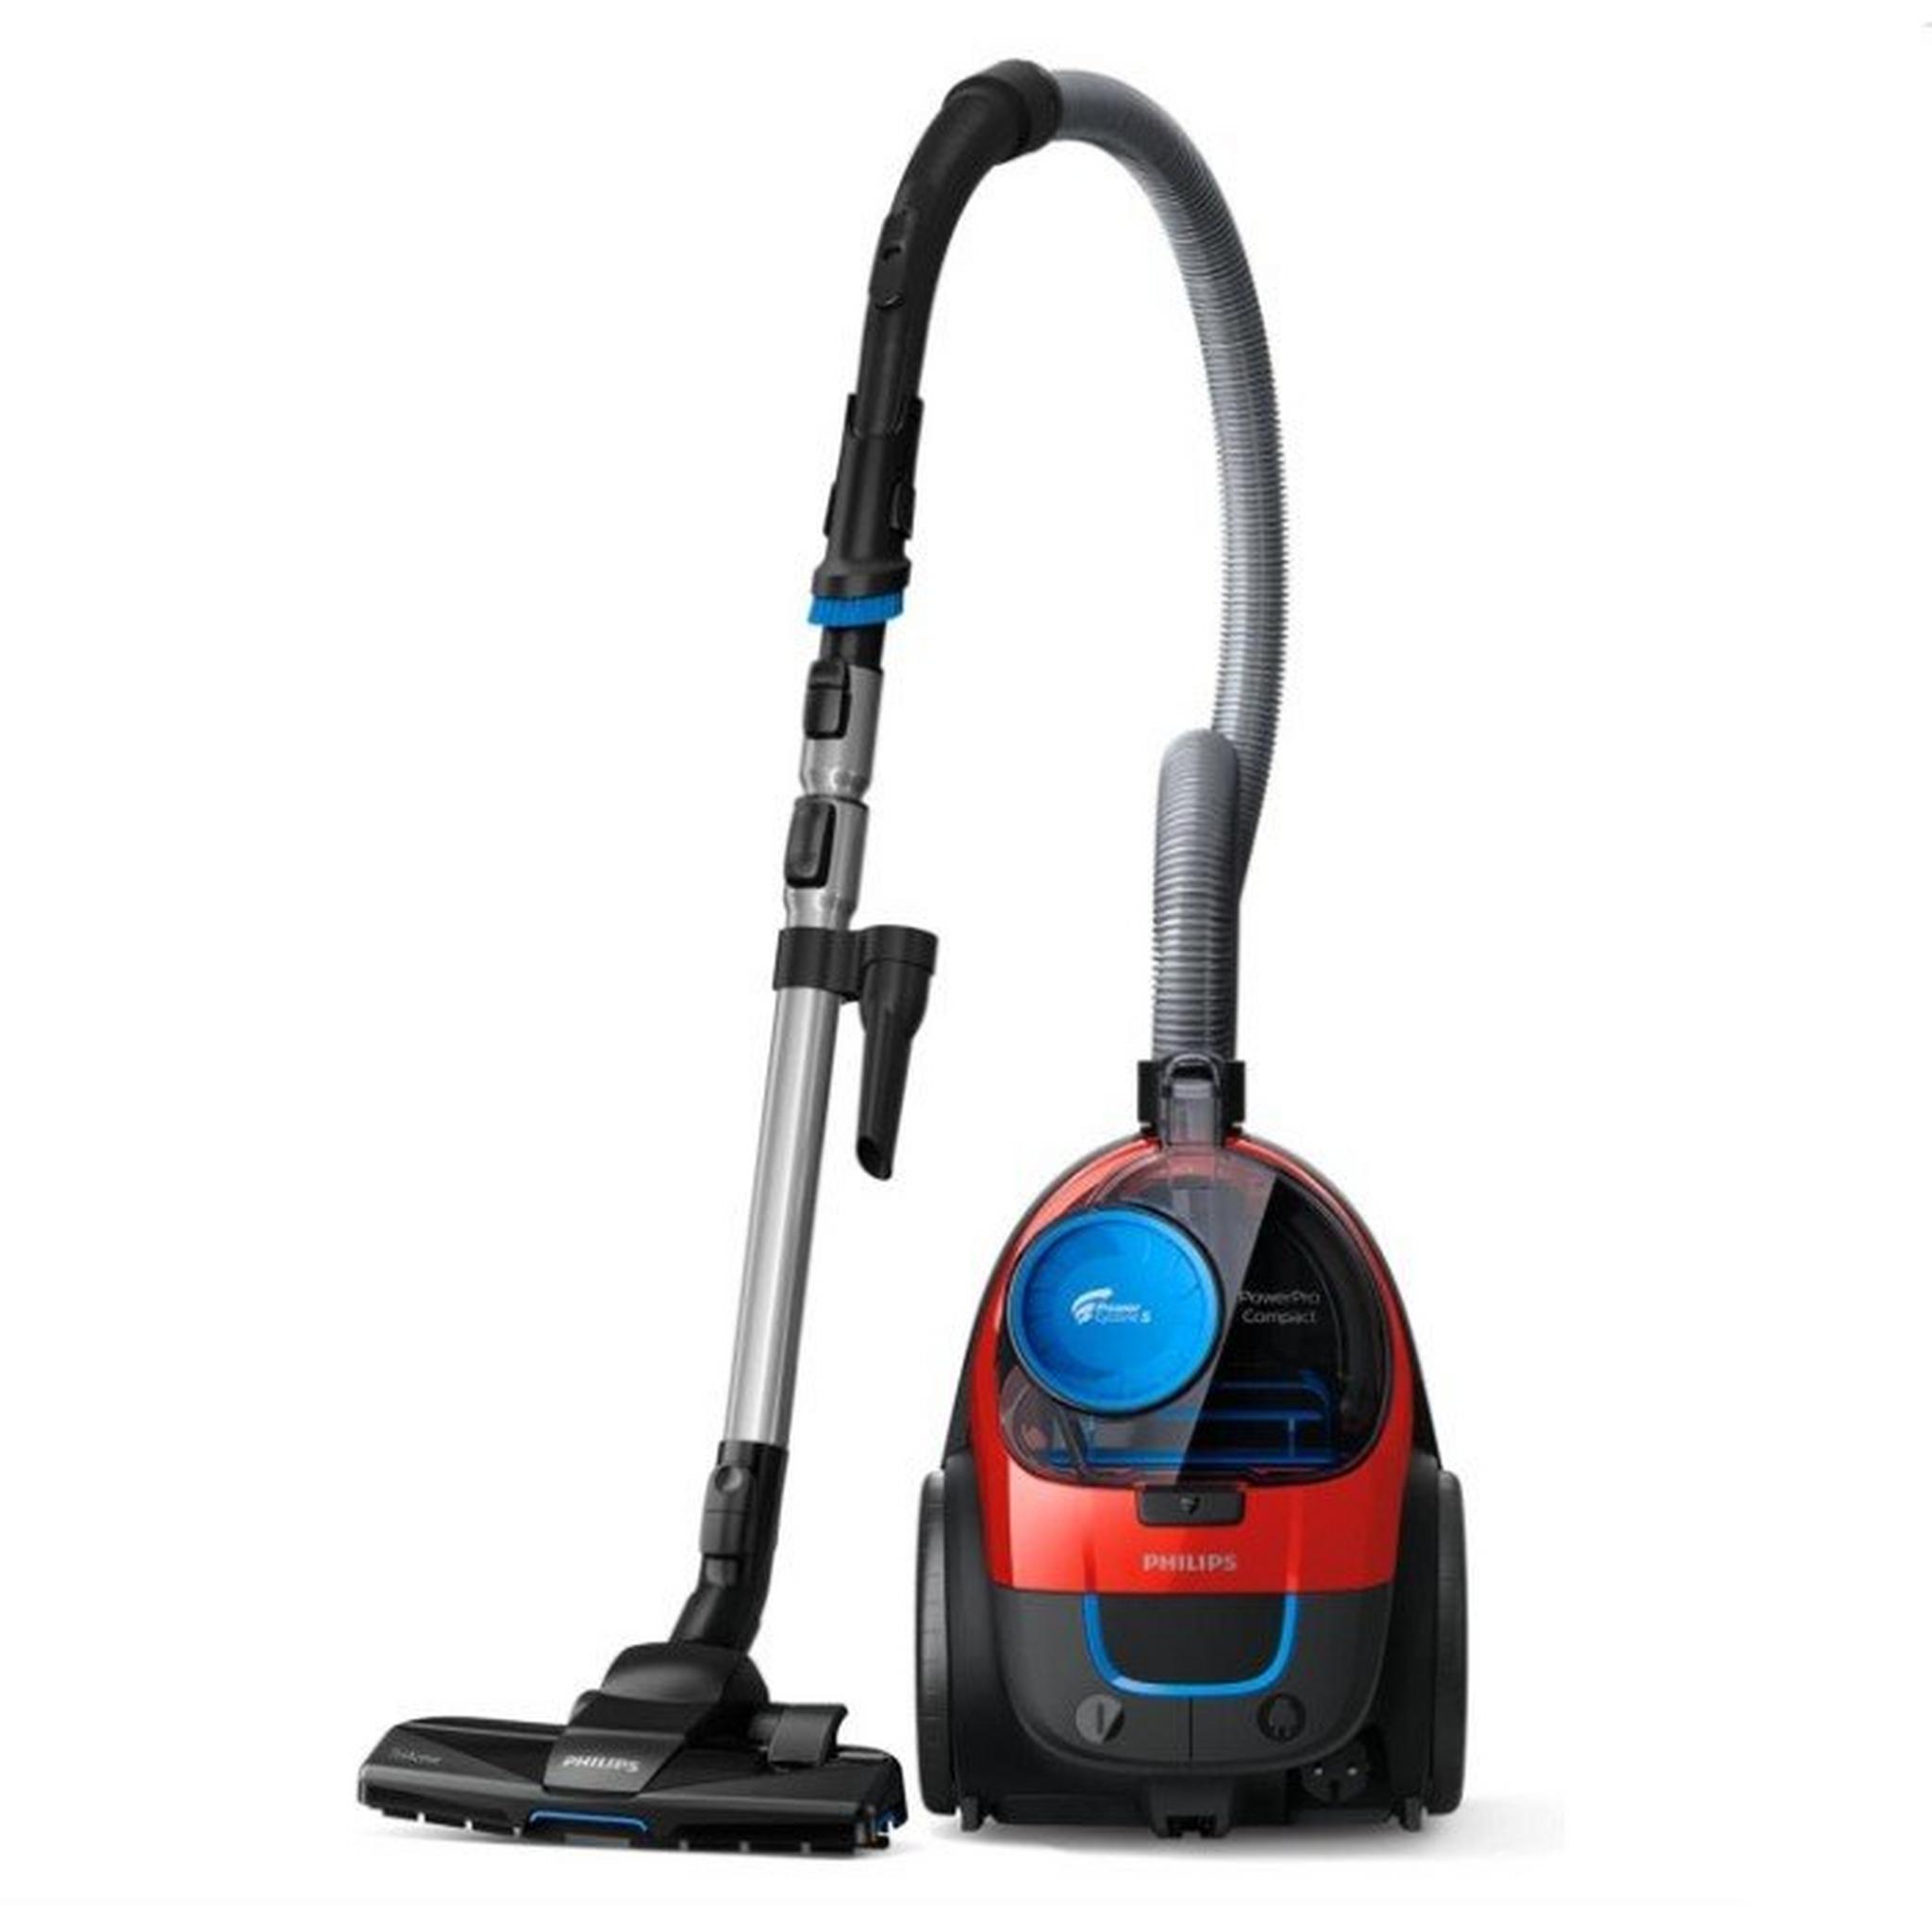 Philips  PowerPro Compact Bagless Vacuum Cleaner,1900 W, 1.5 Litre, FC9351 - Sporty Red